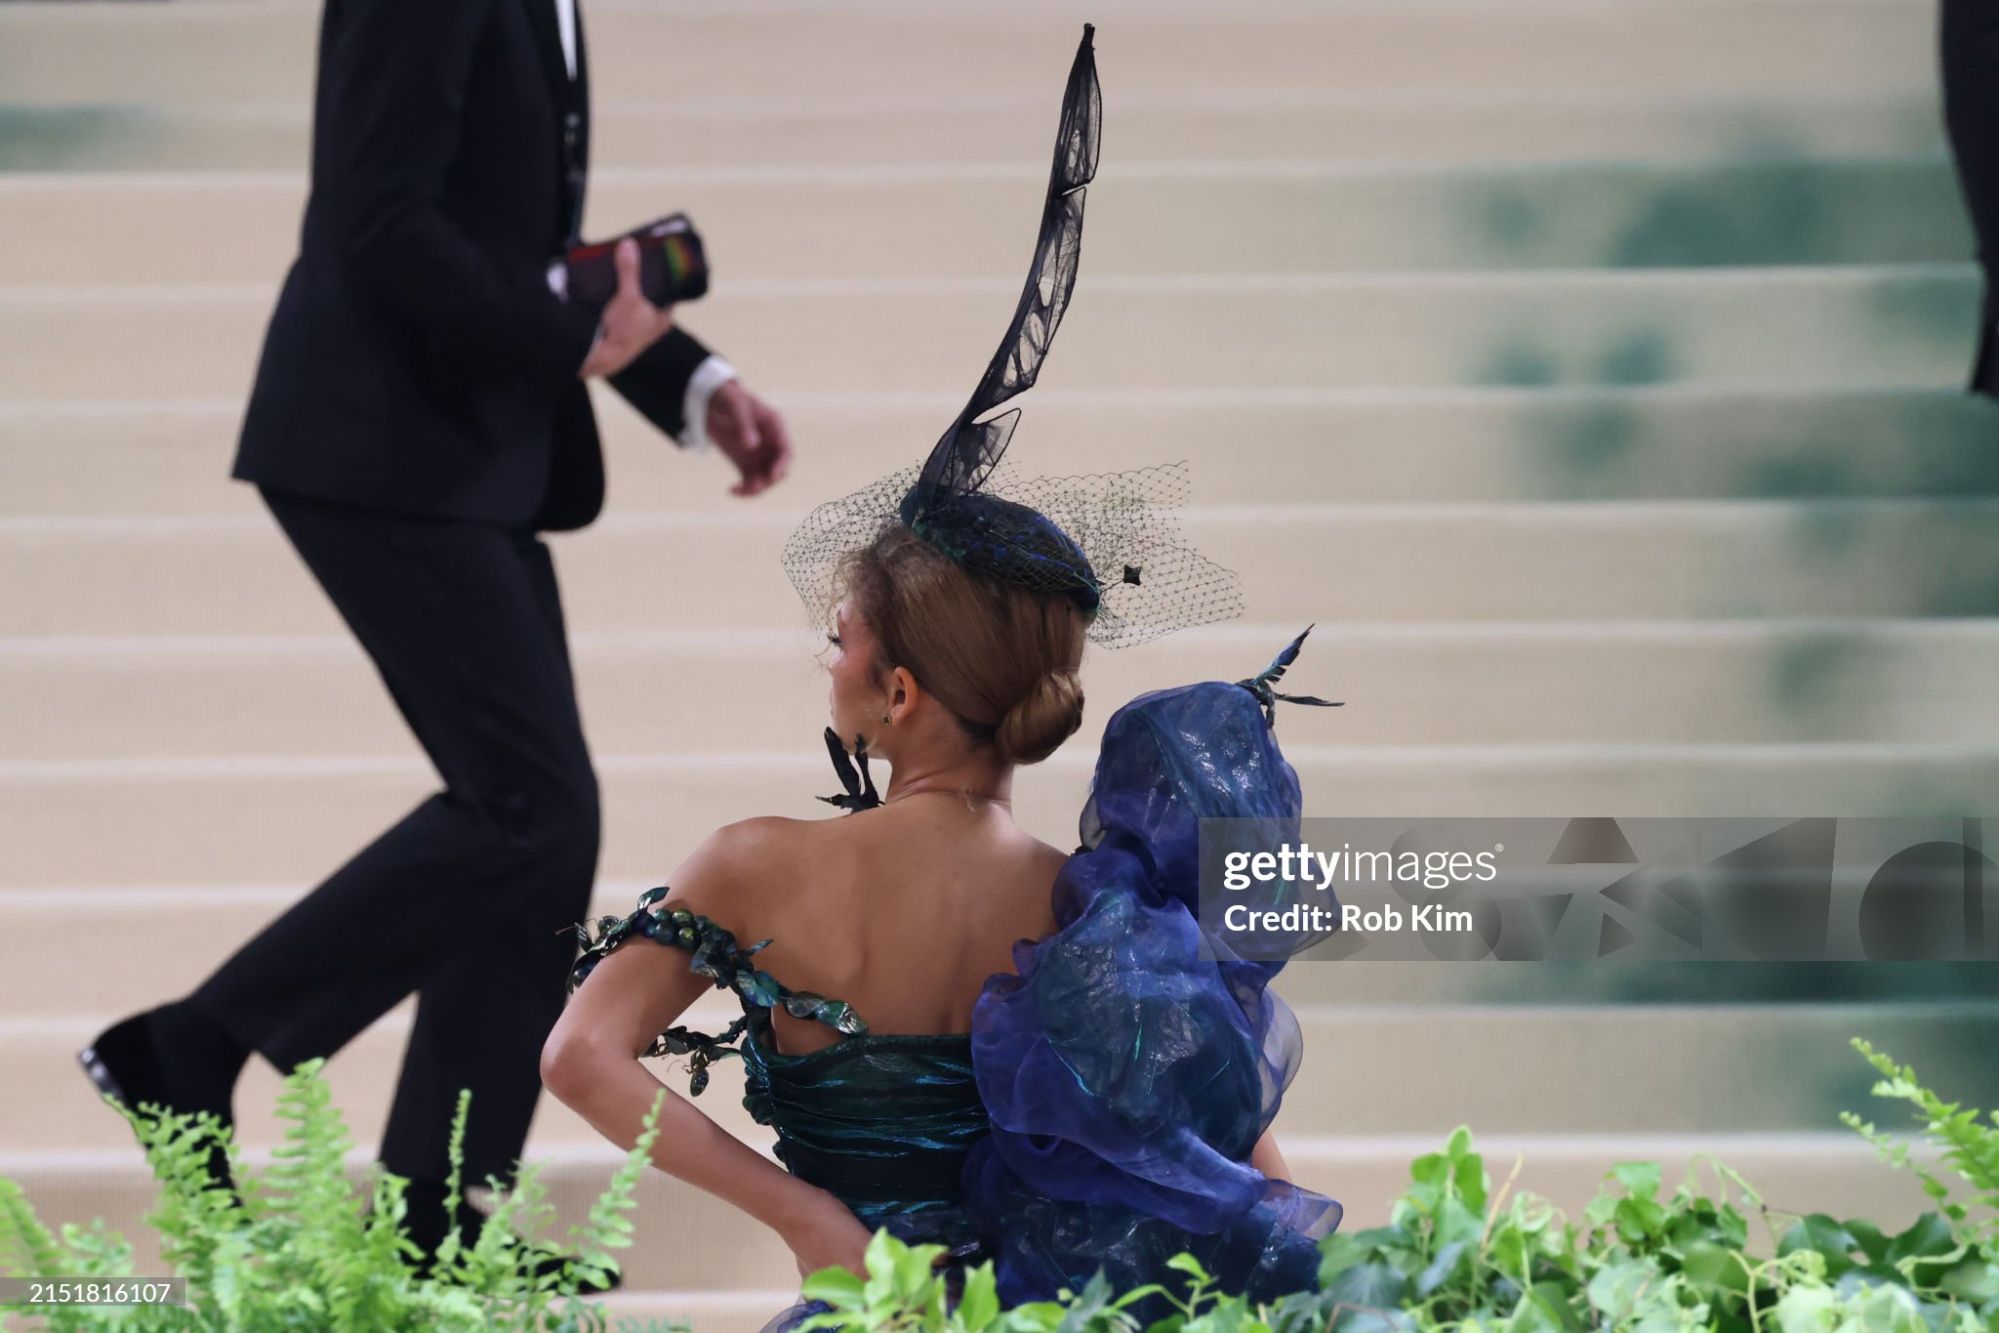 gettyimages-2151816107-2048x2048.jpg